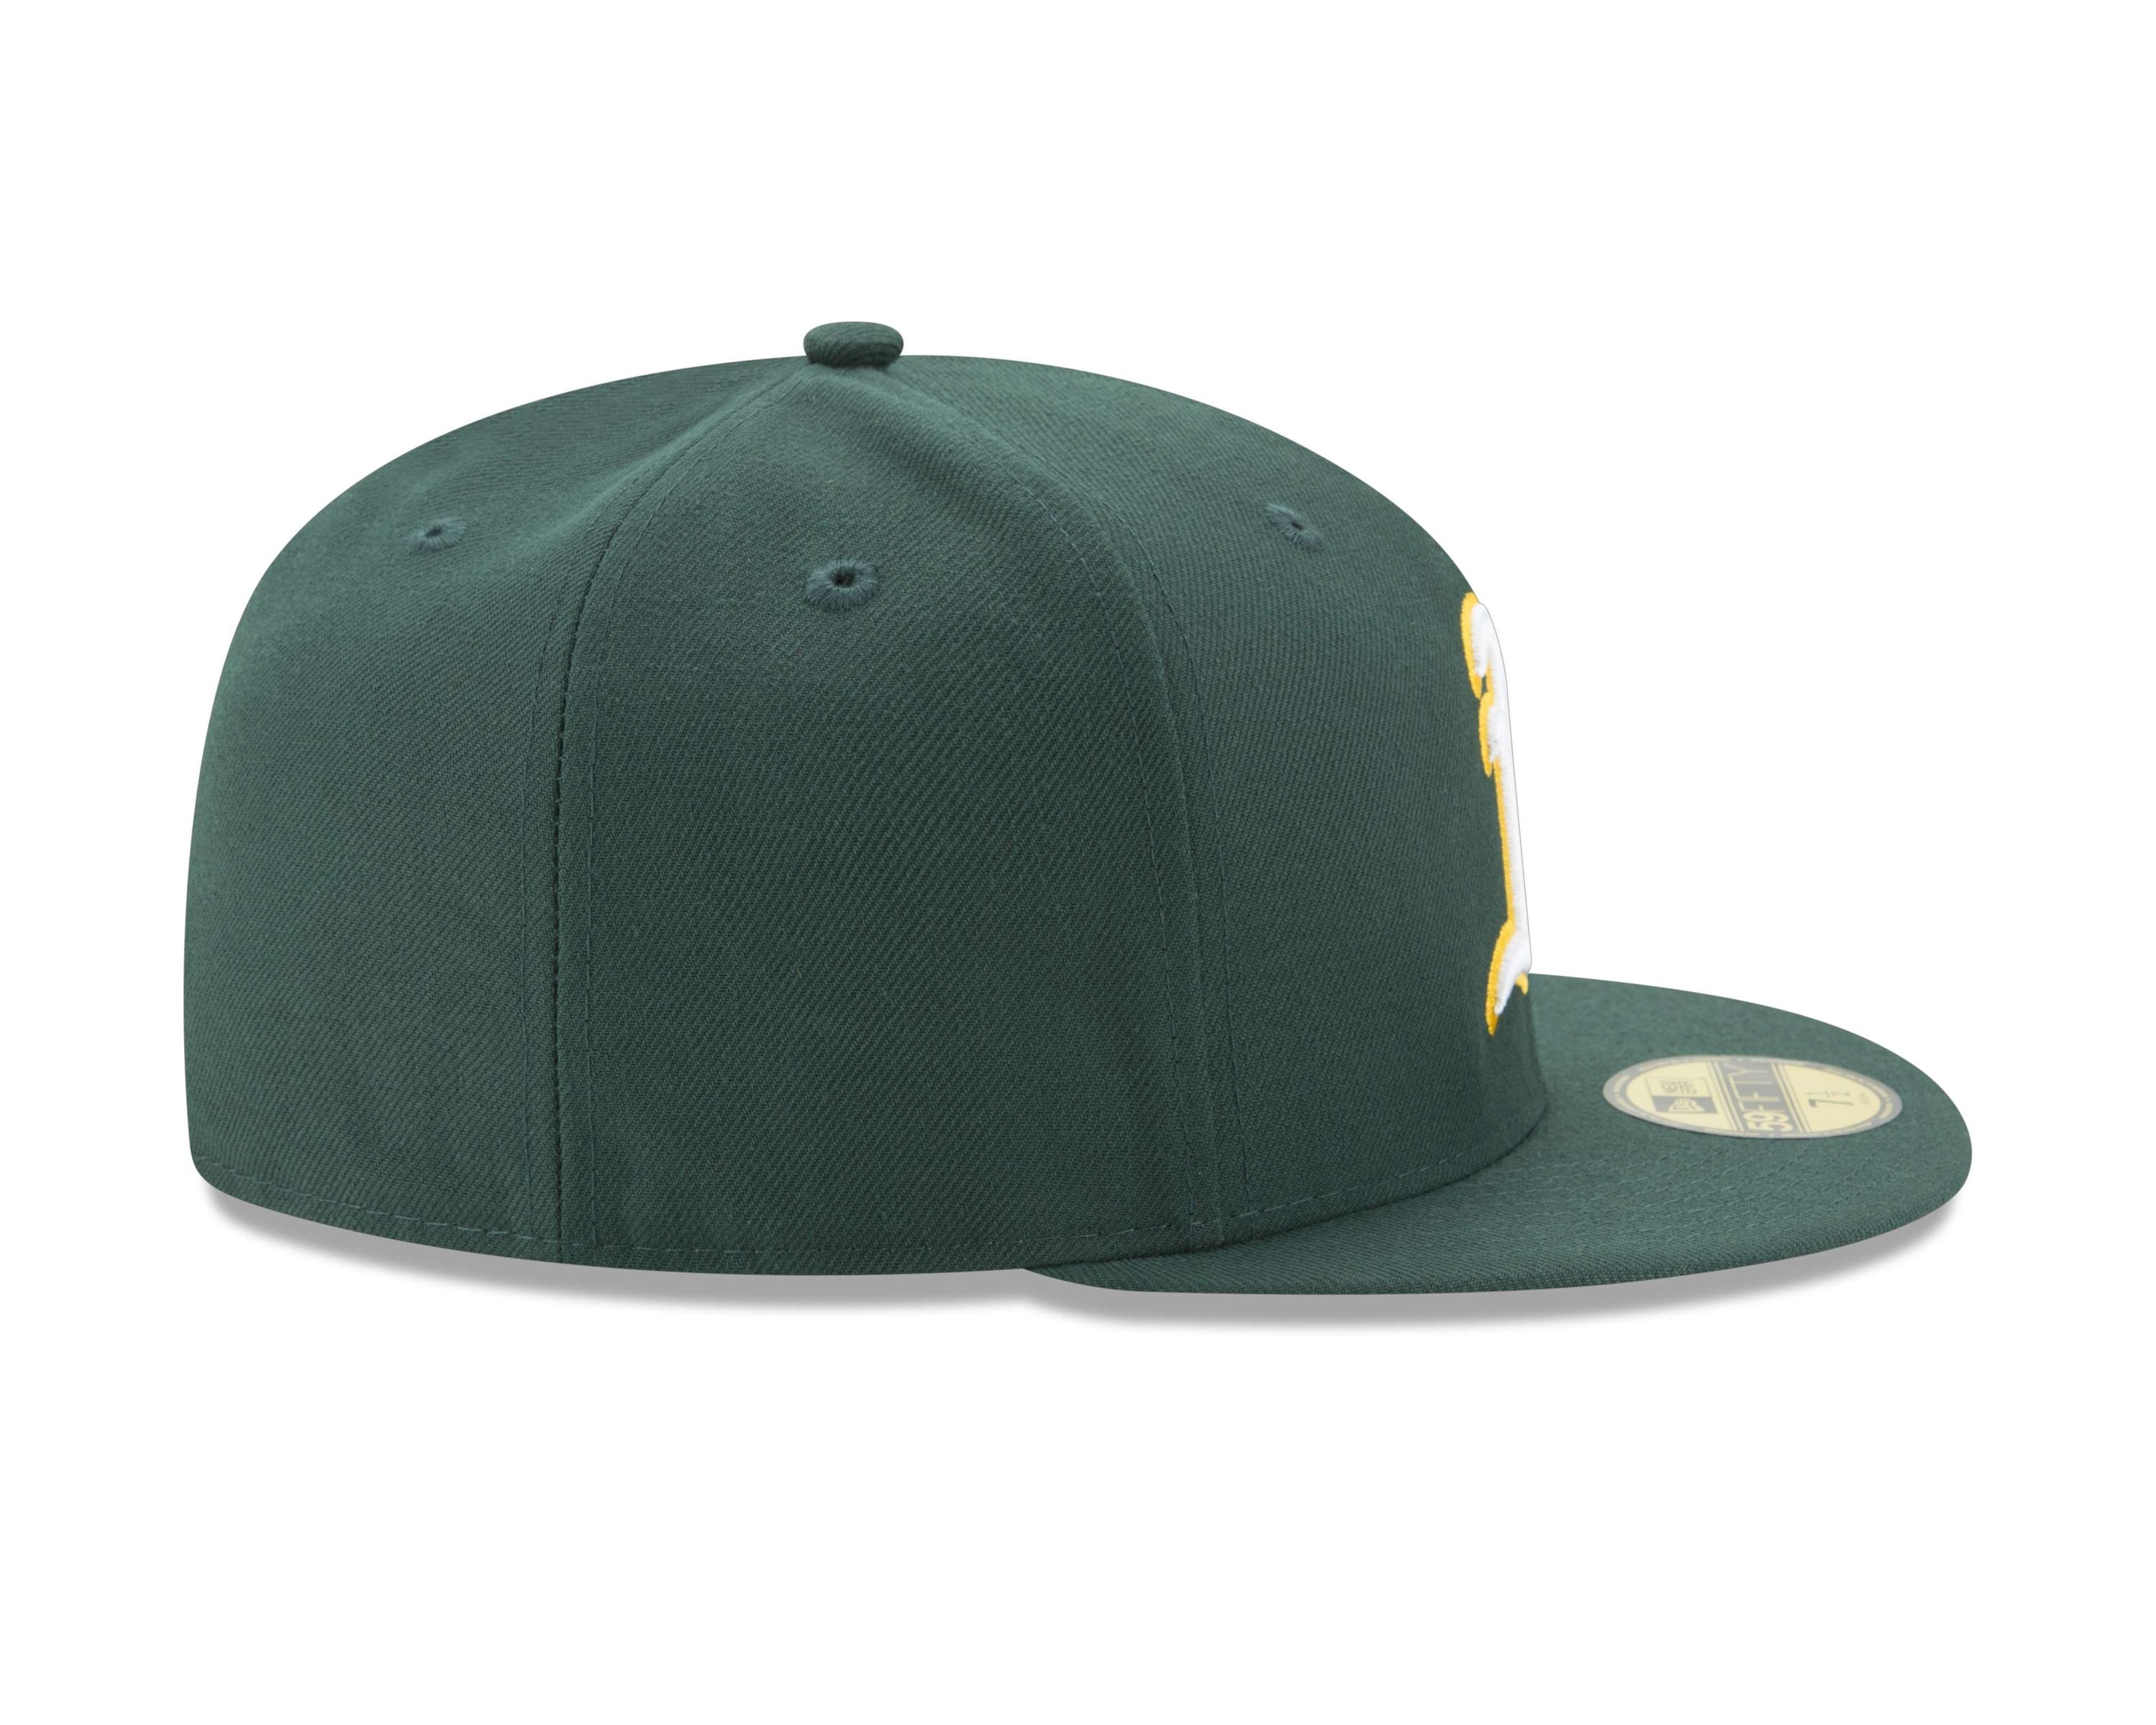 New Era - MLB Oakland Athletics Authentic Collection Alternate Fitted Cap -